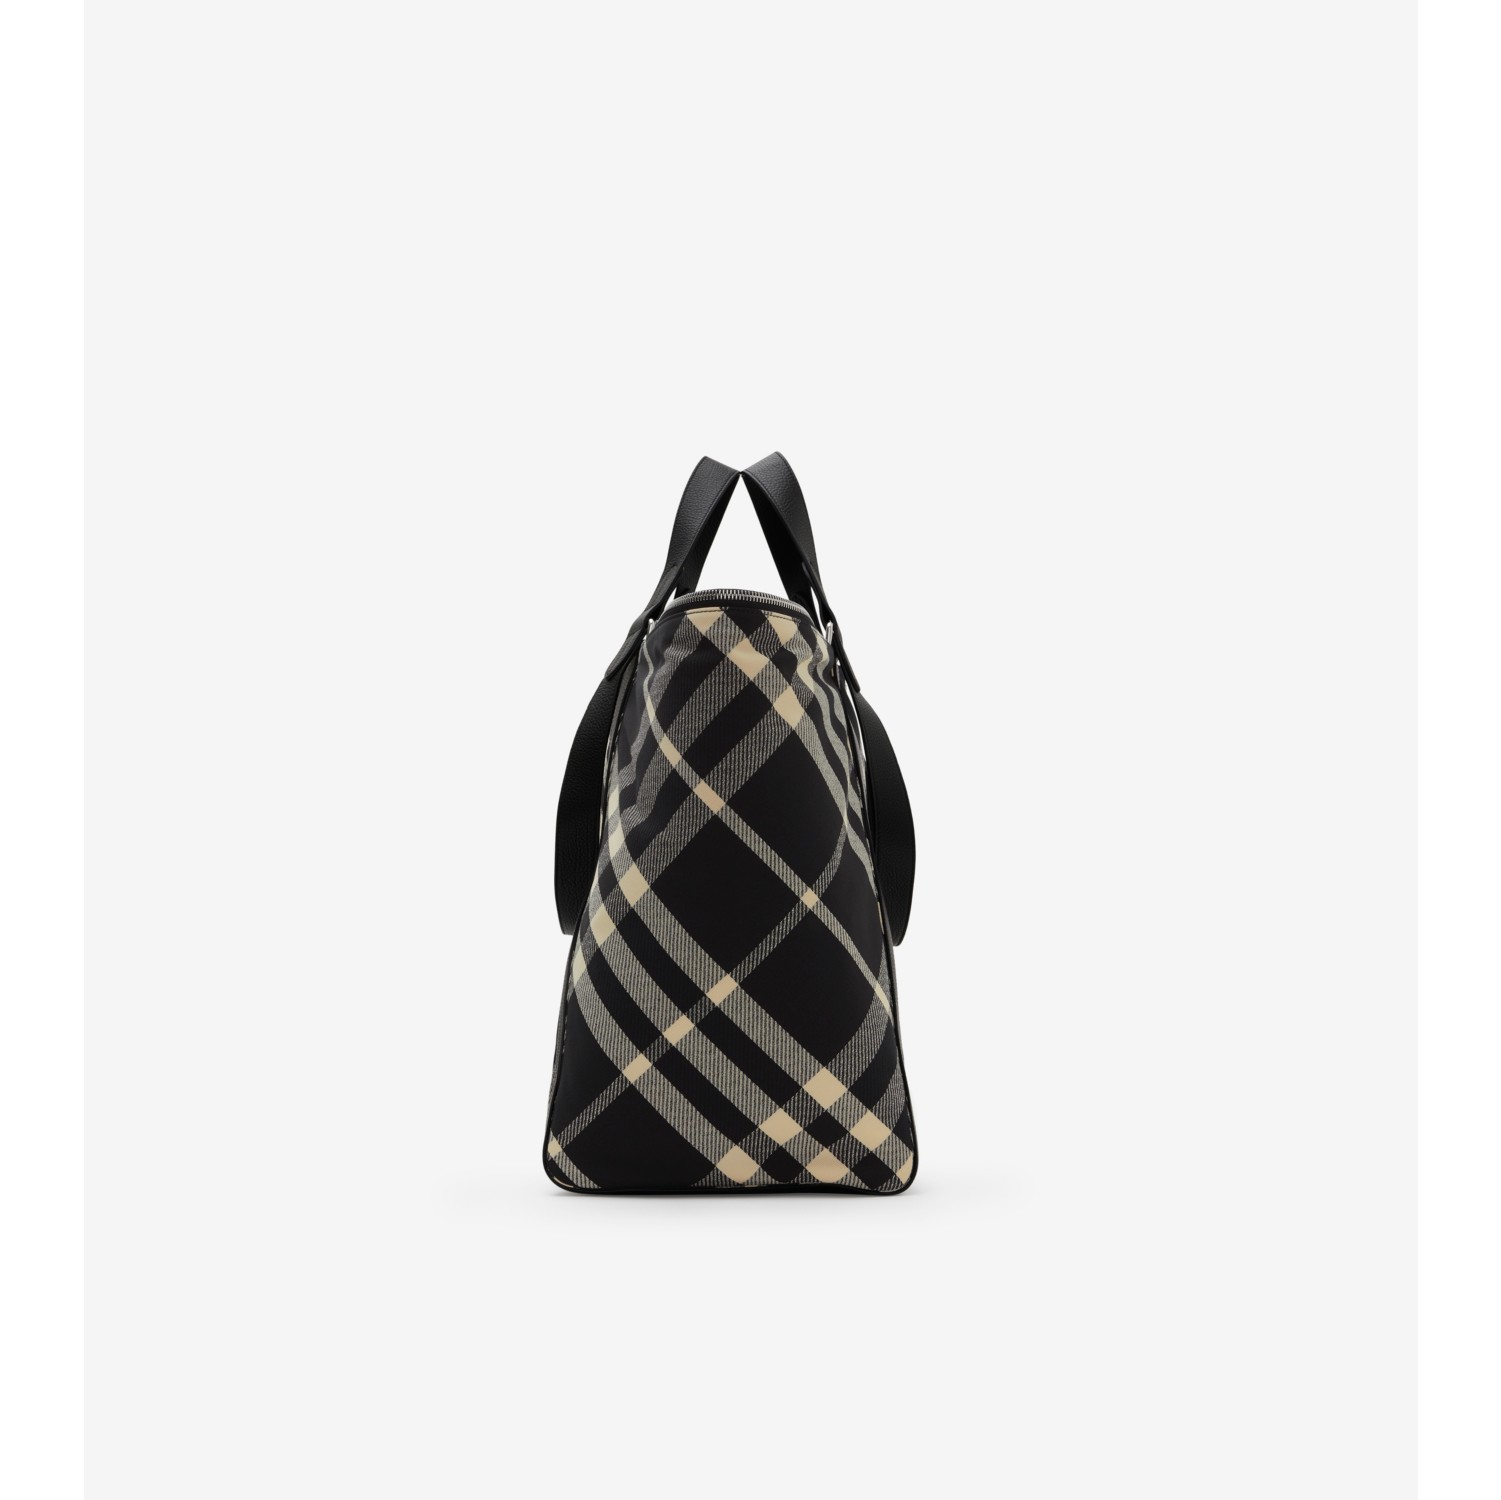 Medium Field Tote in Black/calico - Women | Burberry® Official